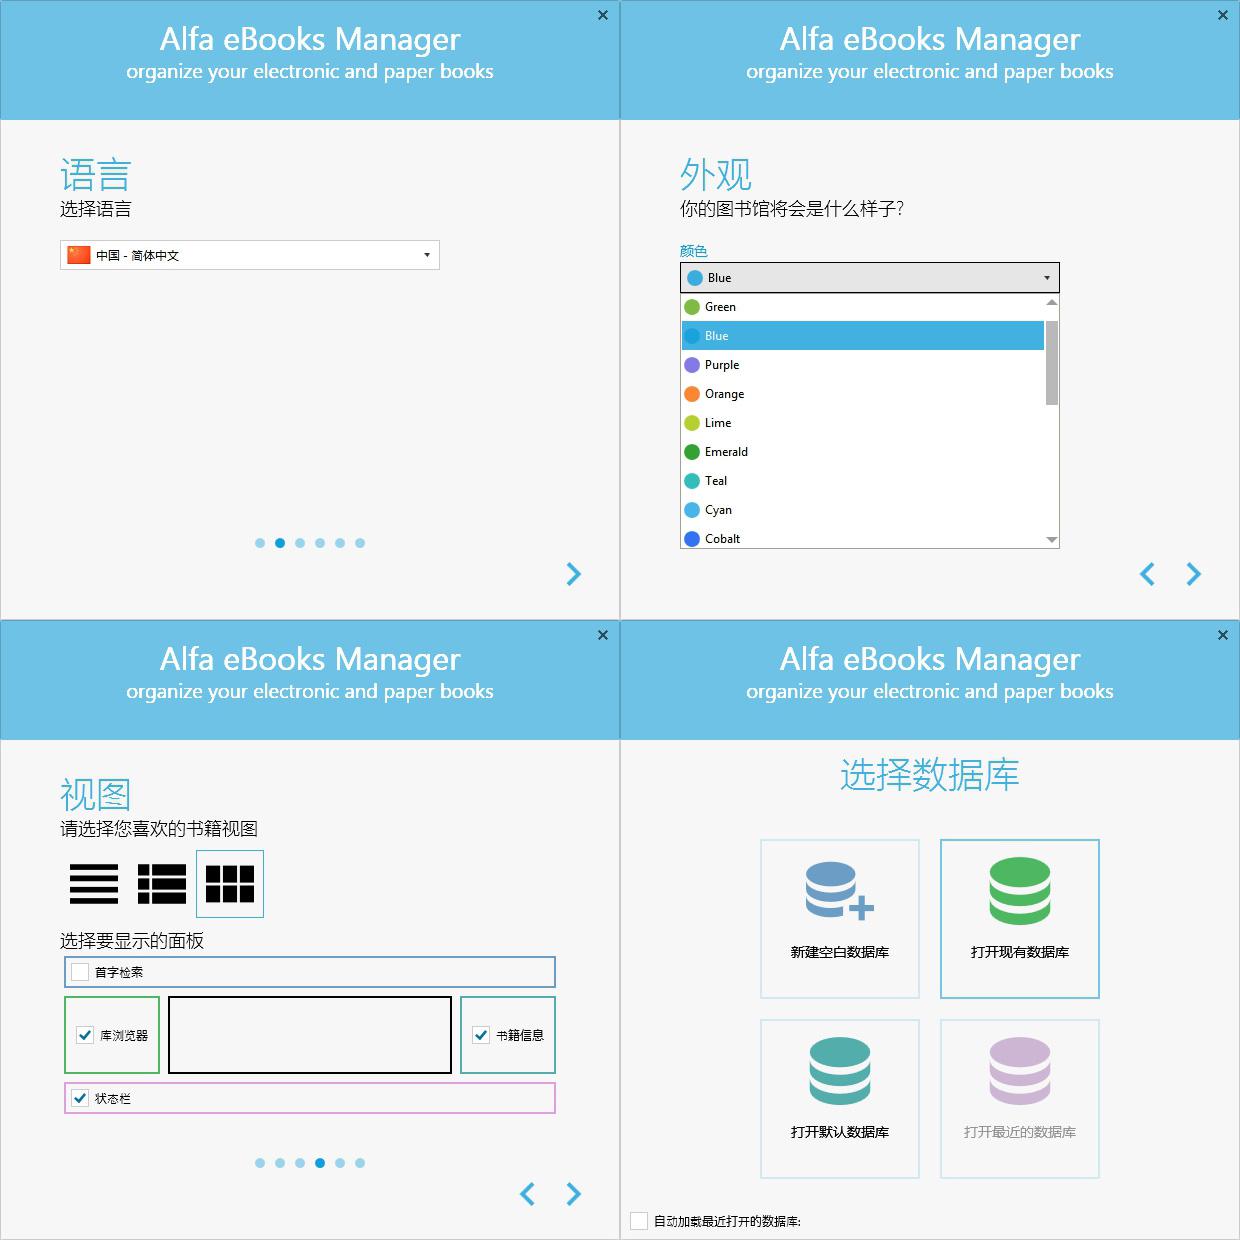 Alfa eBooks Manager Pro 8.6.14.1 download the new version for ios